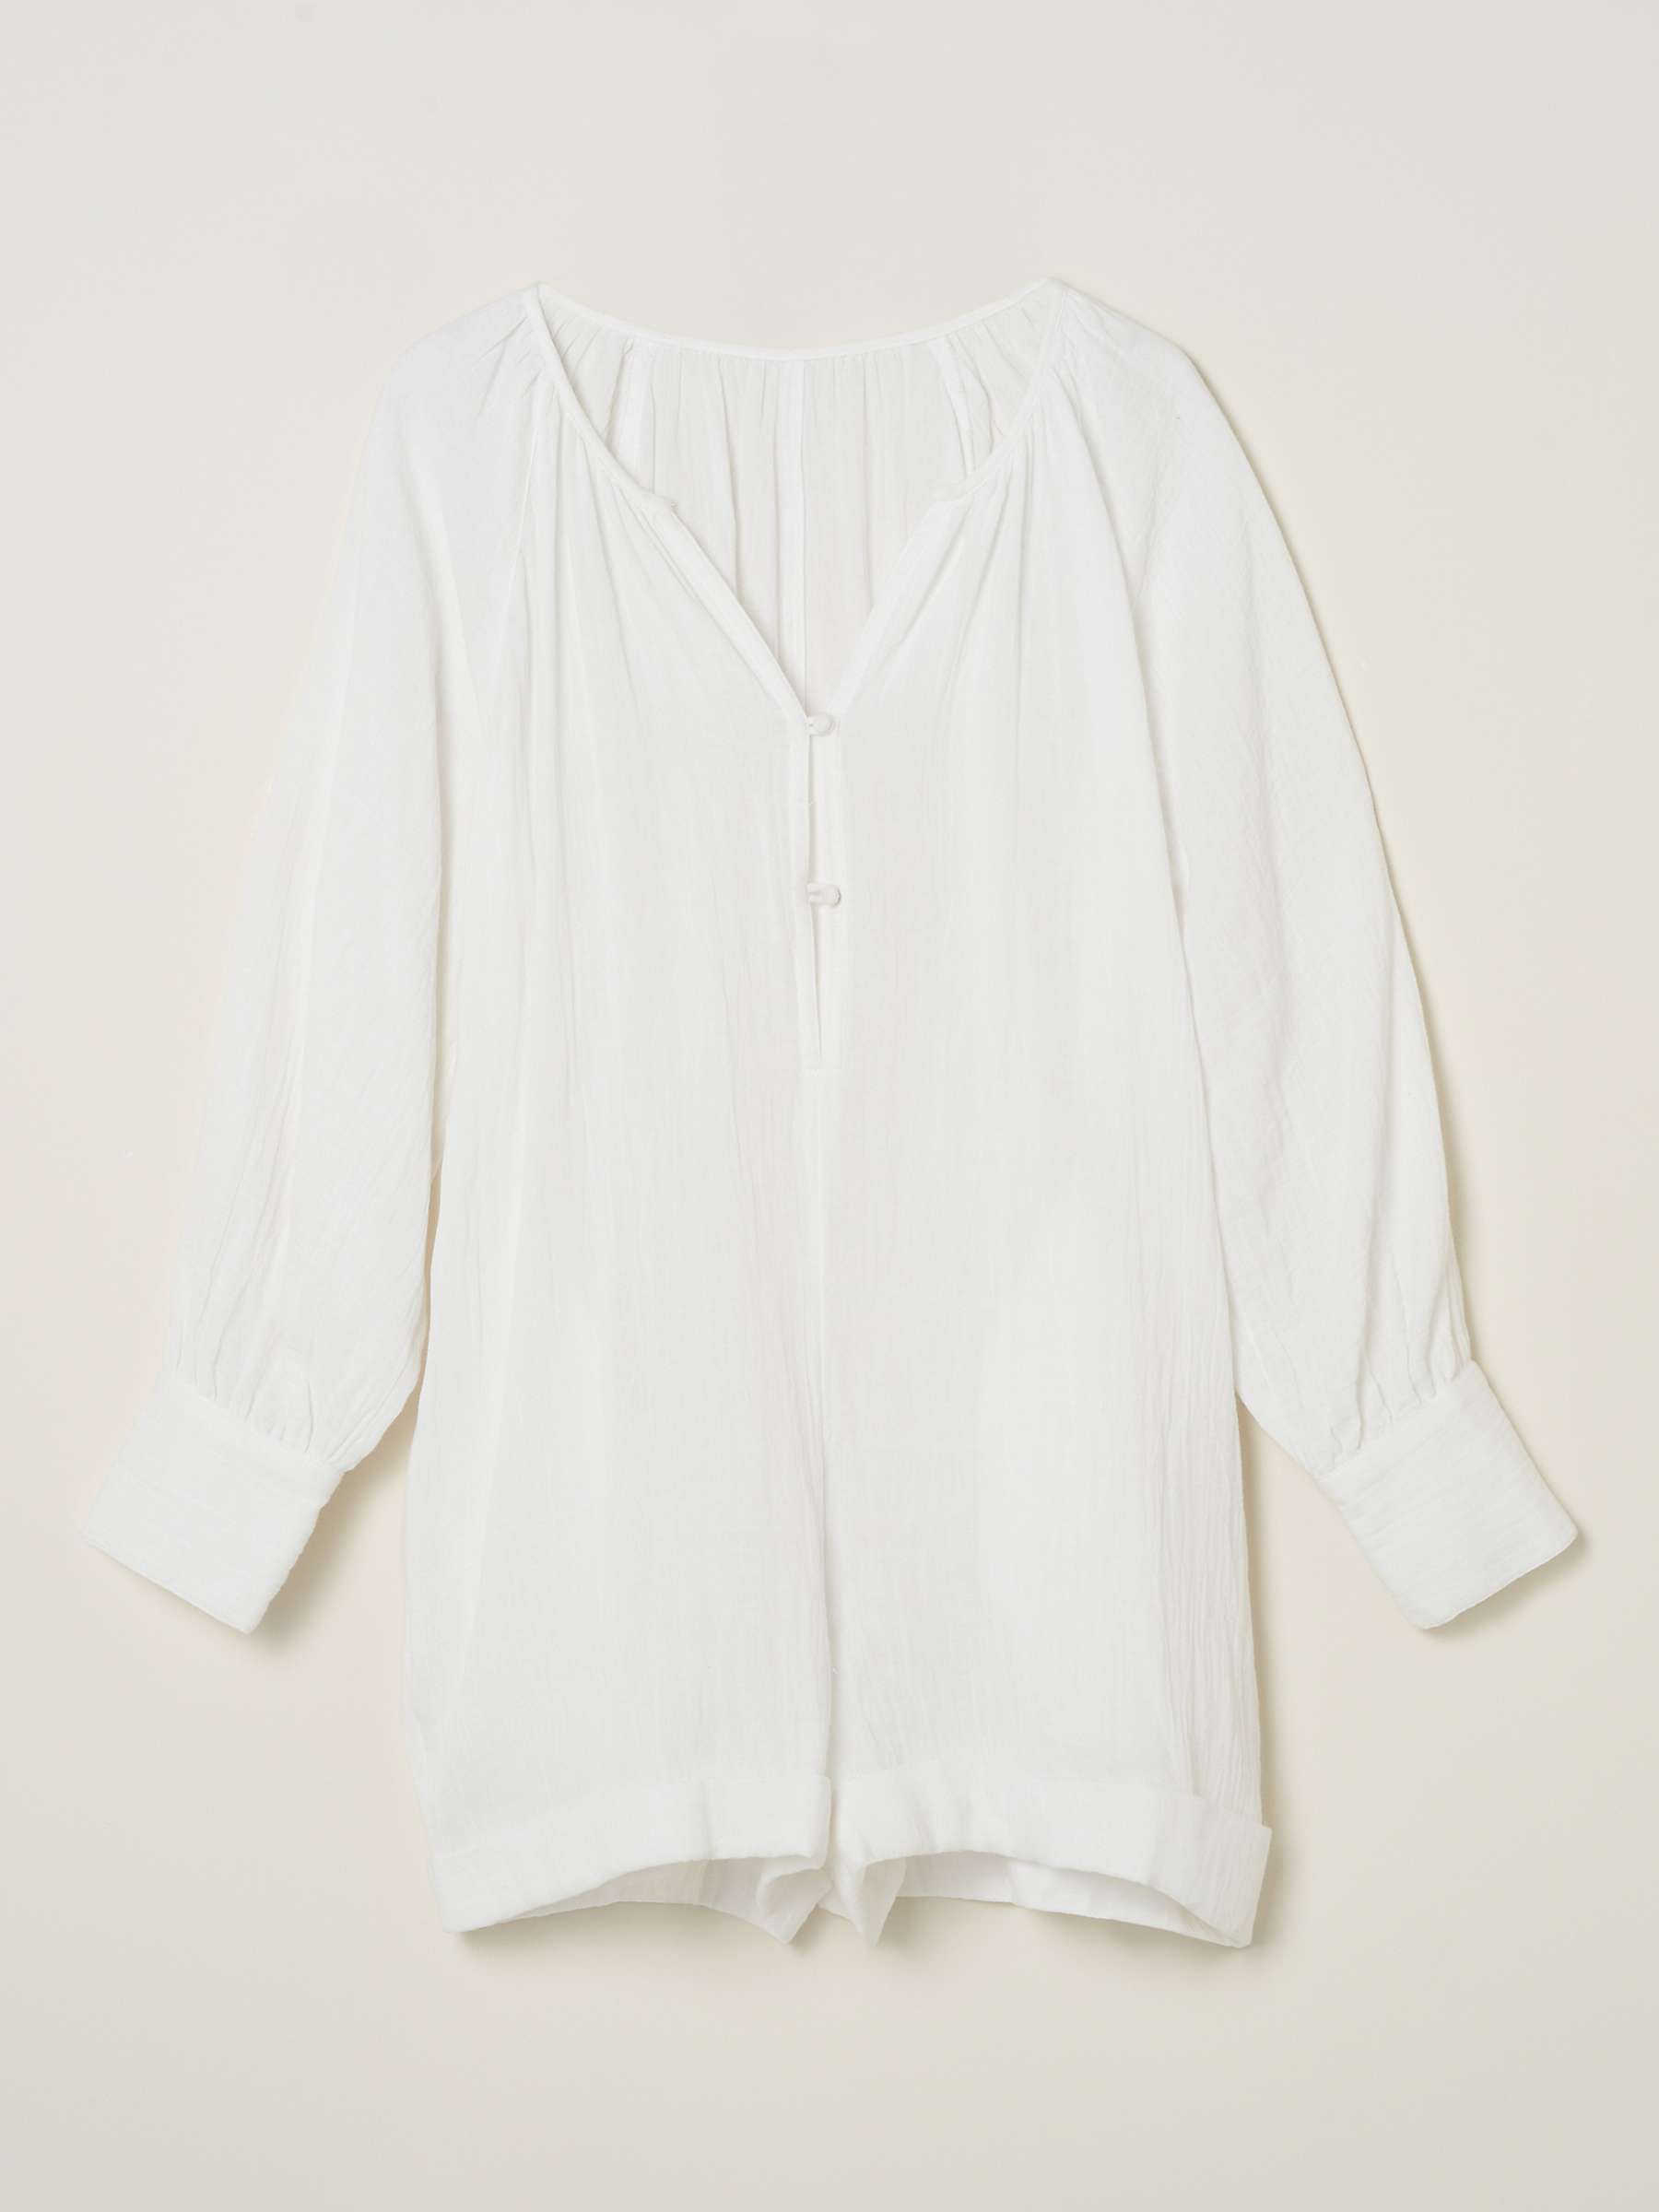 Buy Truly Cotton Cheesecloth Playsuit Online at johnlewis.com